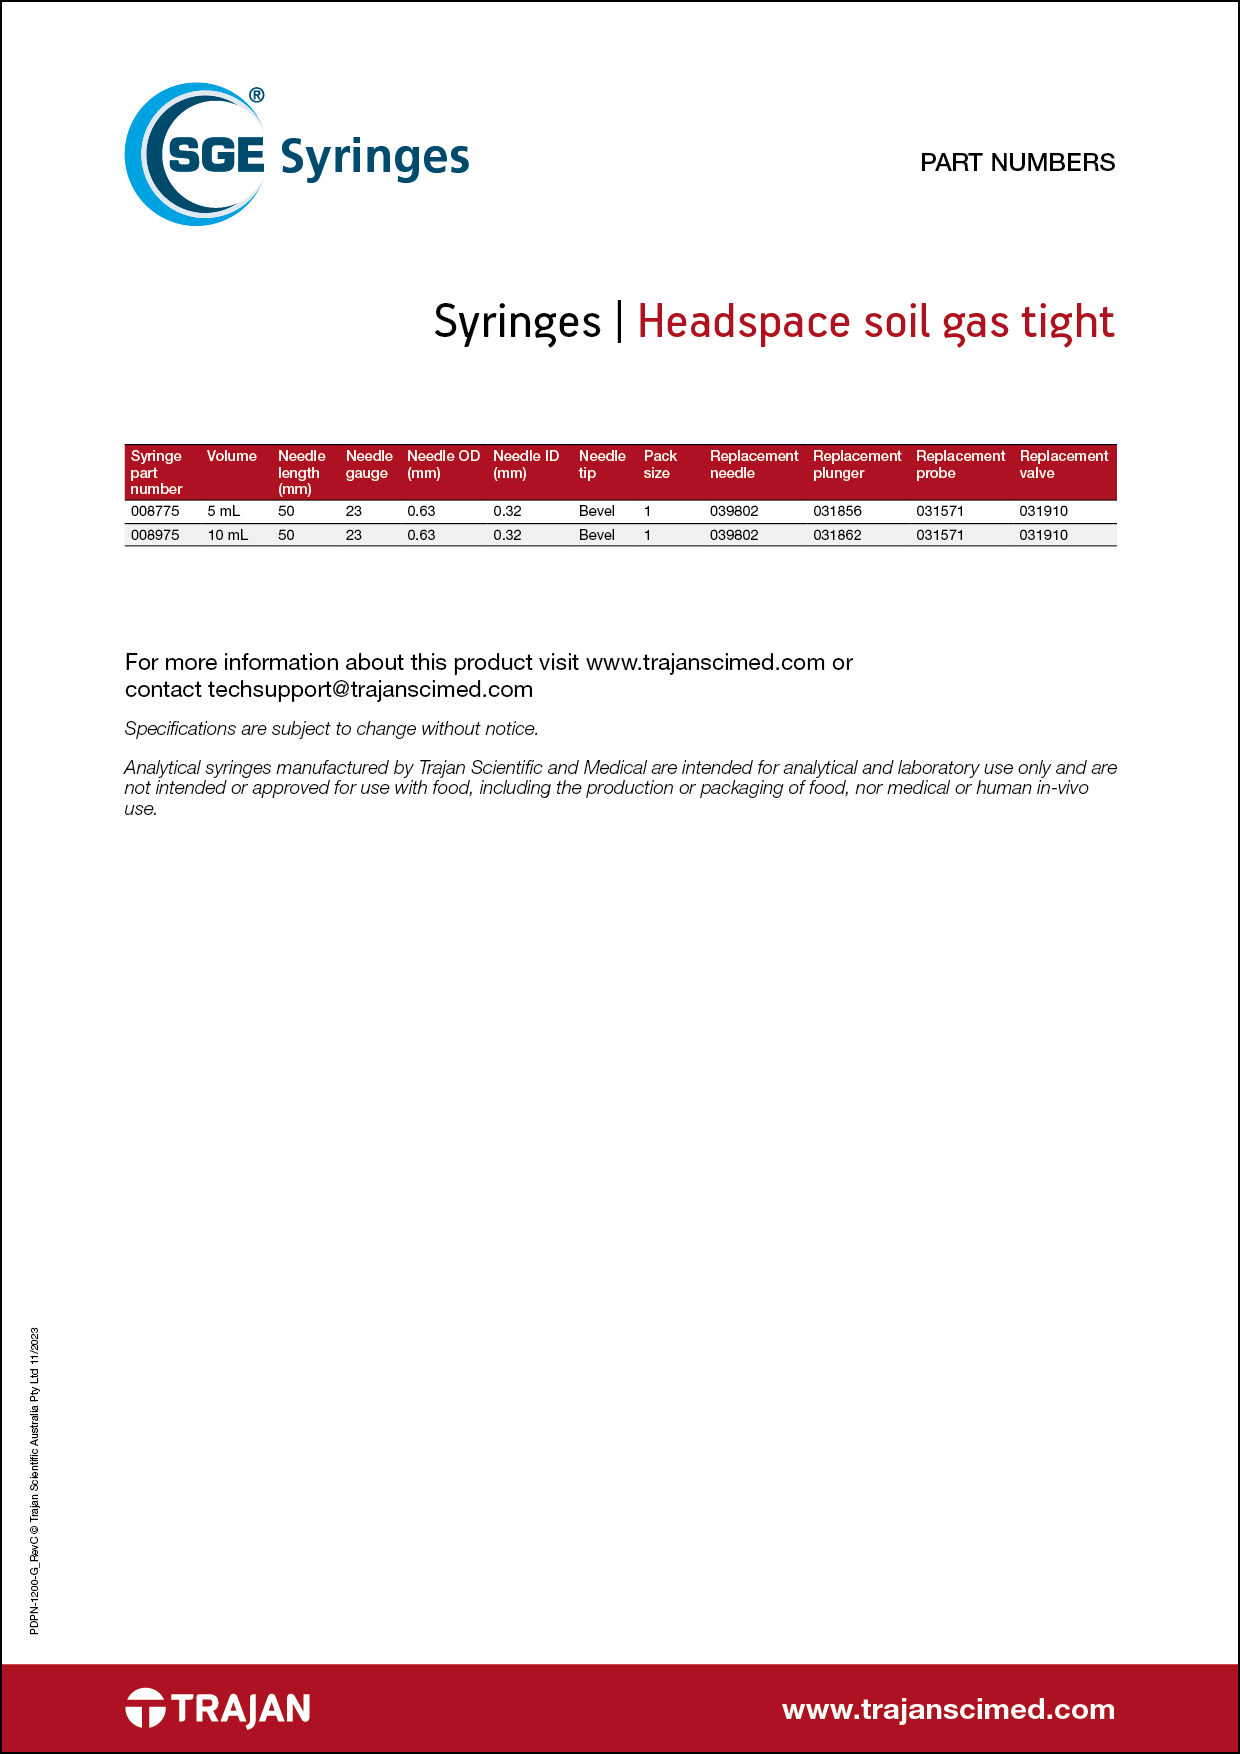 Part Number List - SGE headspace soil gas tight syringes